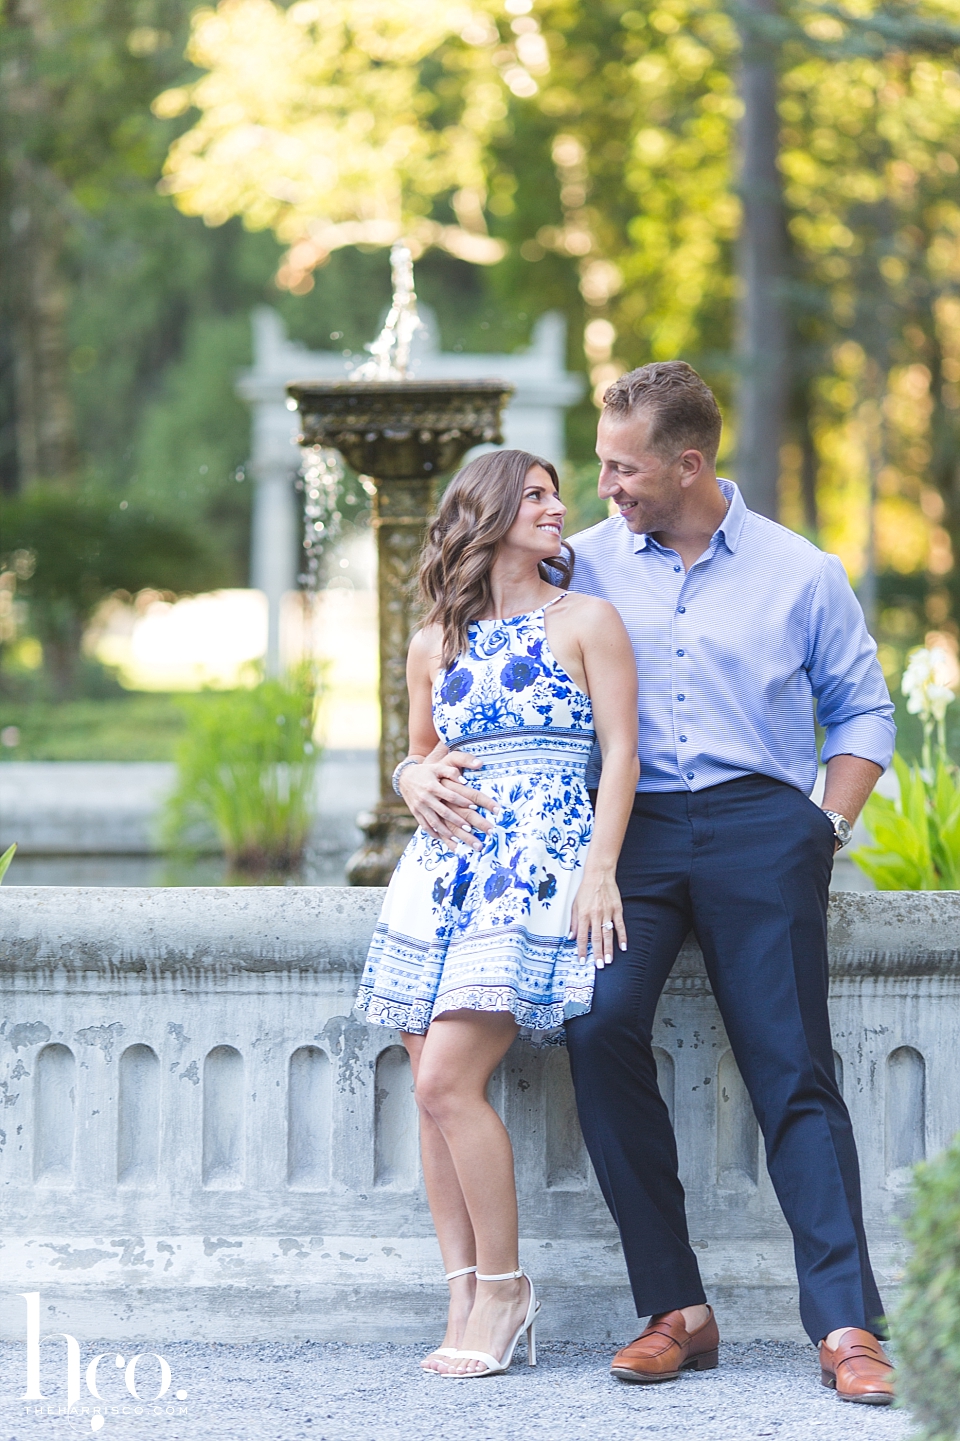 How to Create Meaningful Engagement Images | Engagement Session | Engagement Photography | The Harris Co | theharrisco.com